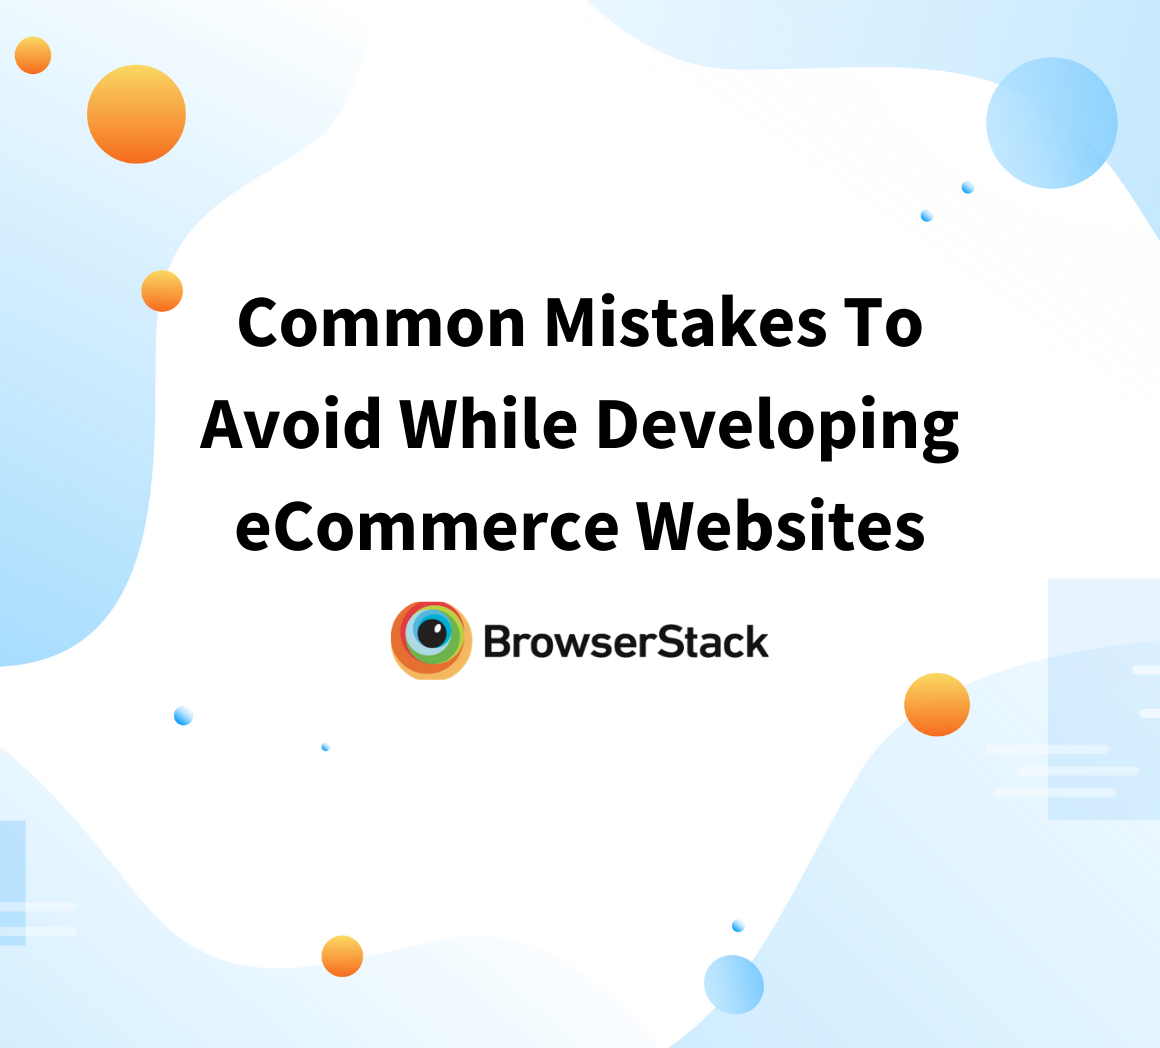 Common Mistakes To Avoid While Developing eCommerce Websites